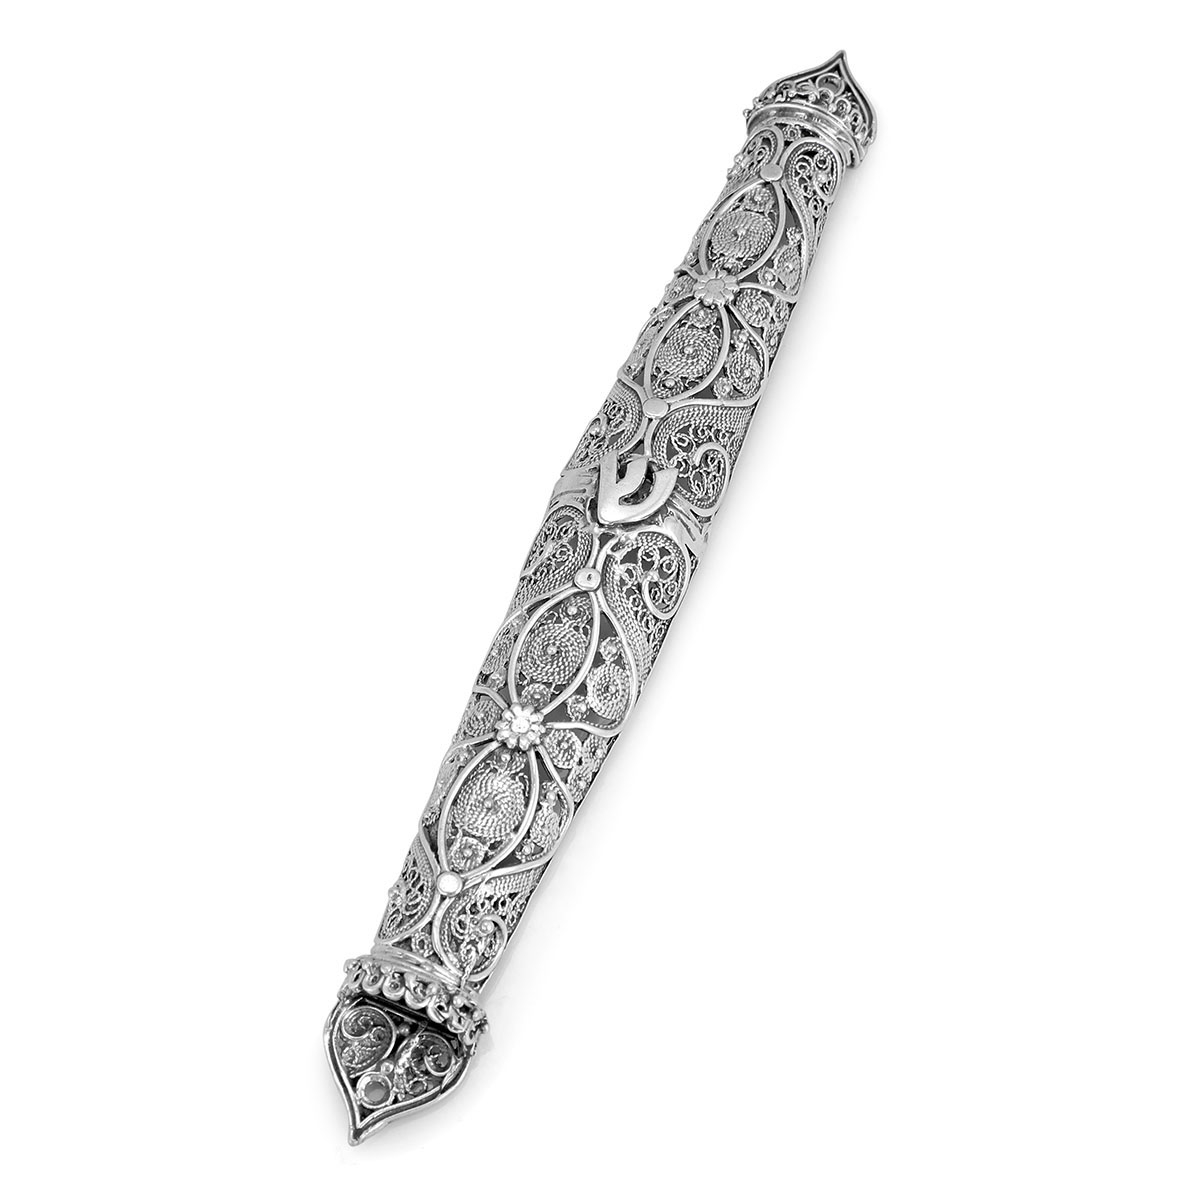 Traditional Yemenite Art Handcrafted Sterling Silver Mezuzah Case With Elaborate Floral Filigree Design - 1